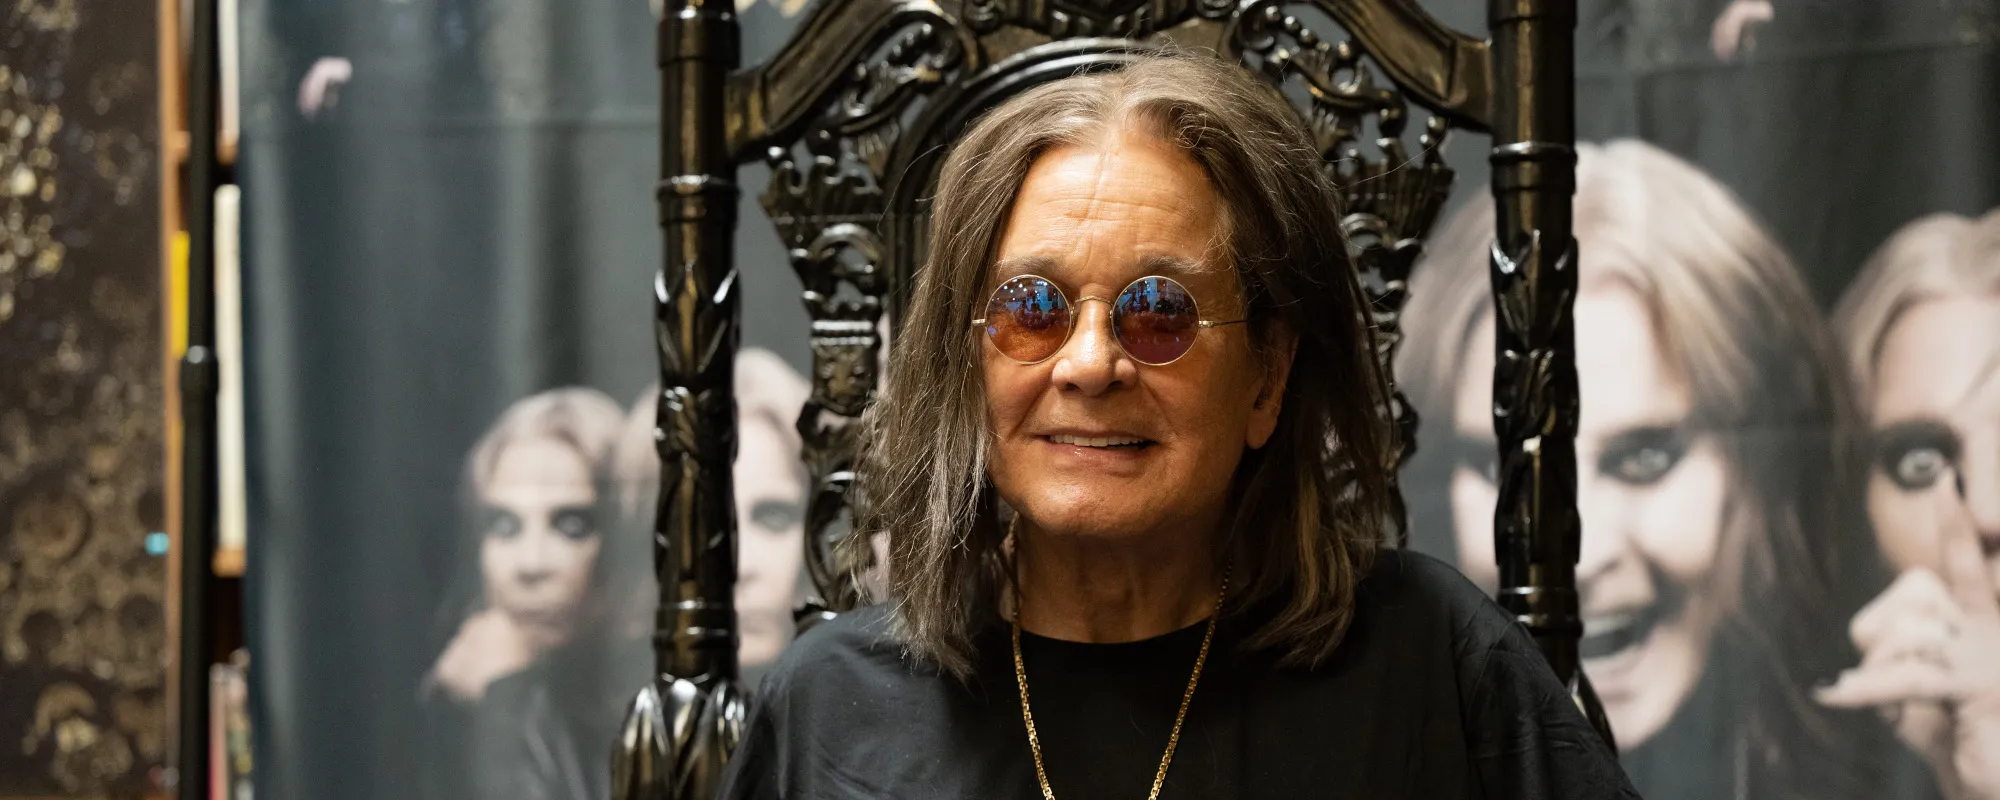 Ozzy Osbourne Gives Health Update: “I’m in a Lot of Discomfort”